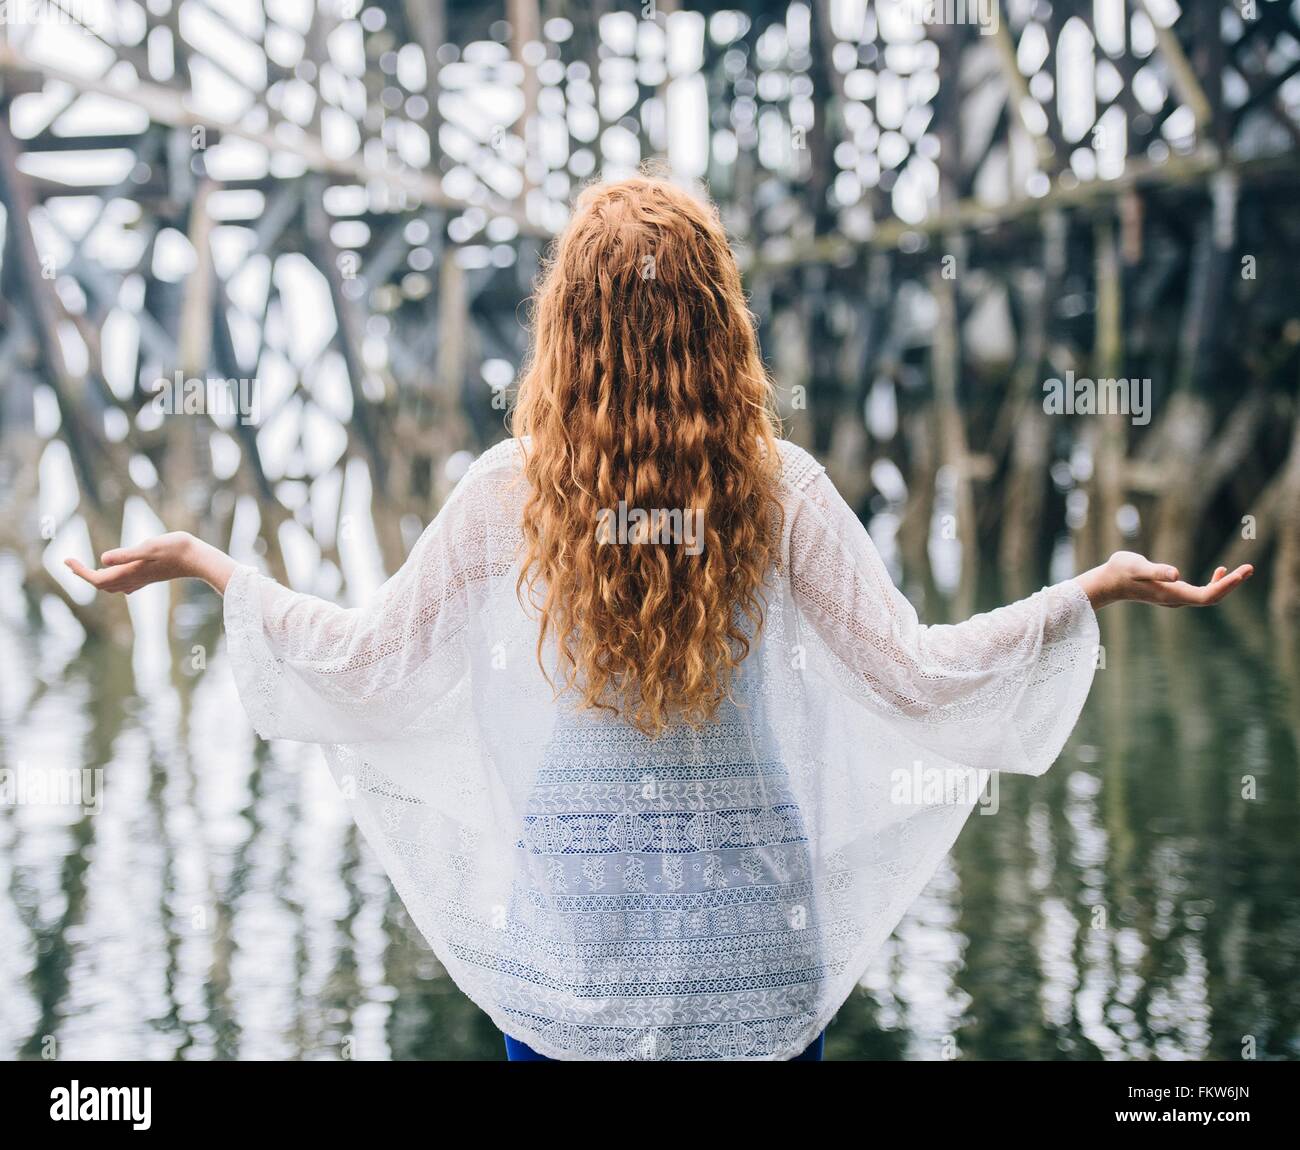 Rear view of woman with long red hair meditating in front of wood river pier Stock Photo